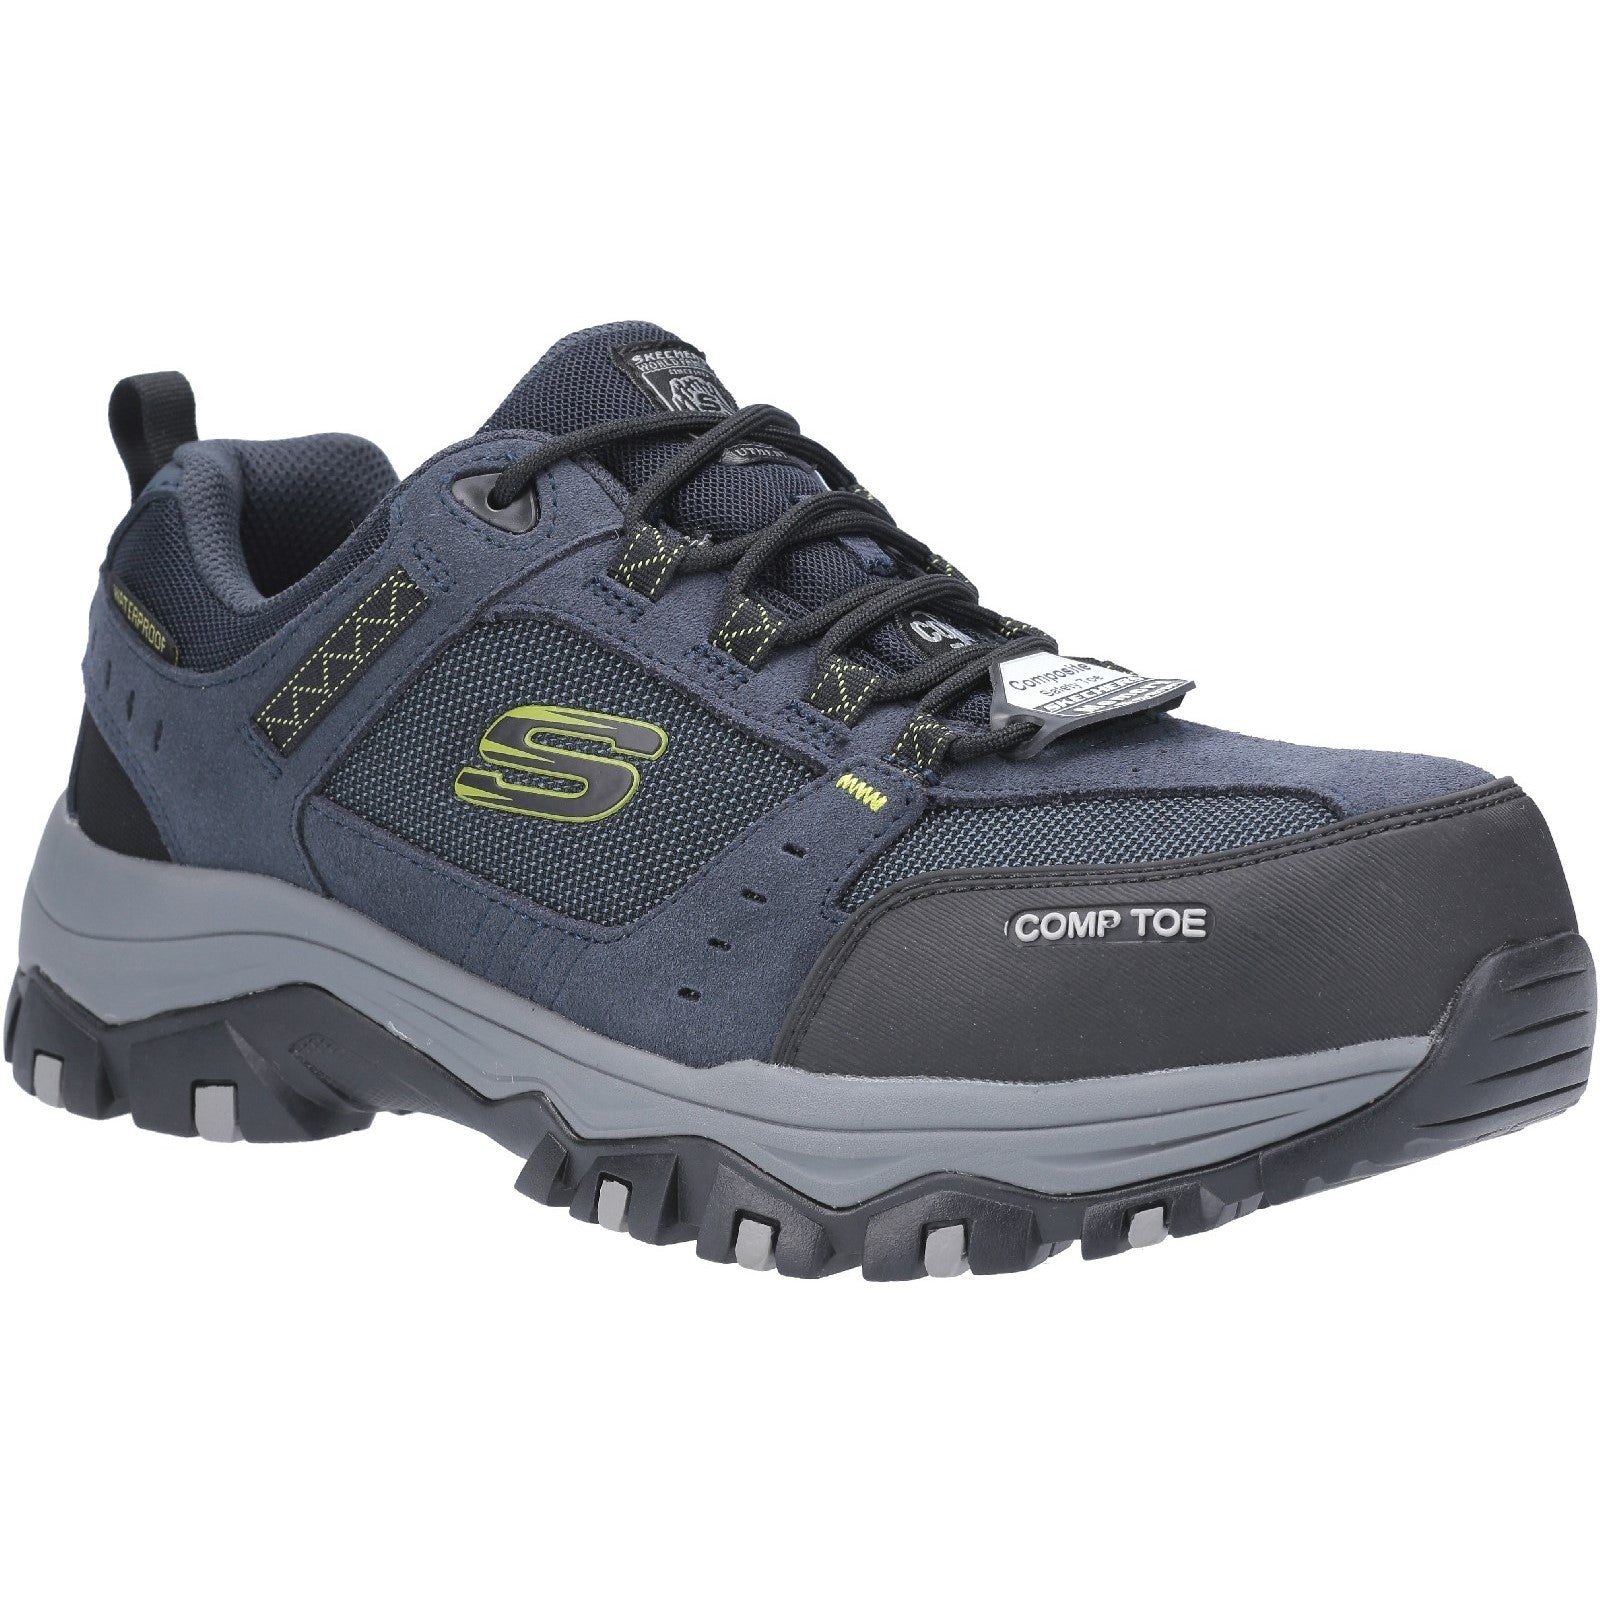 Skechers Greetah Safety Hiker with Composite Toe Trainers